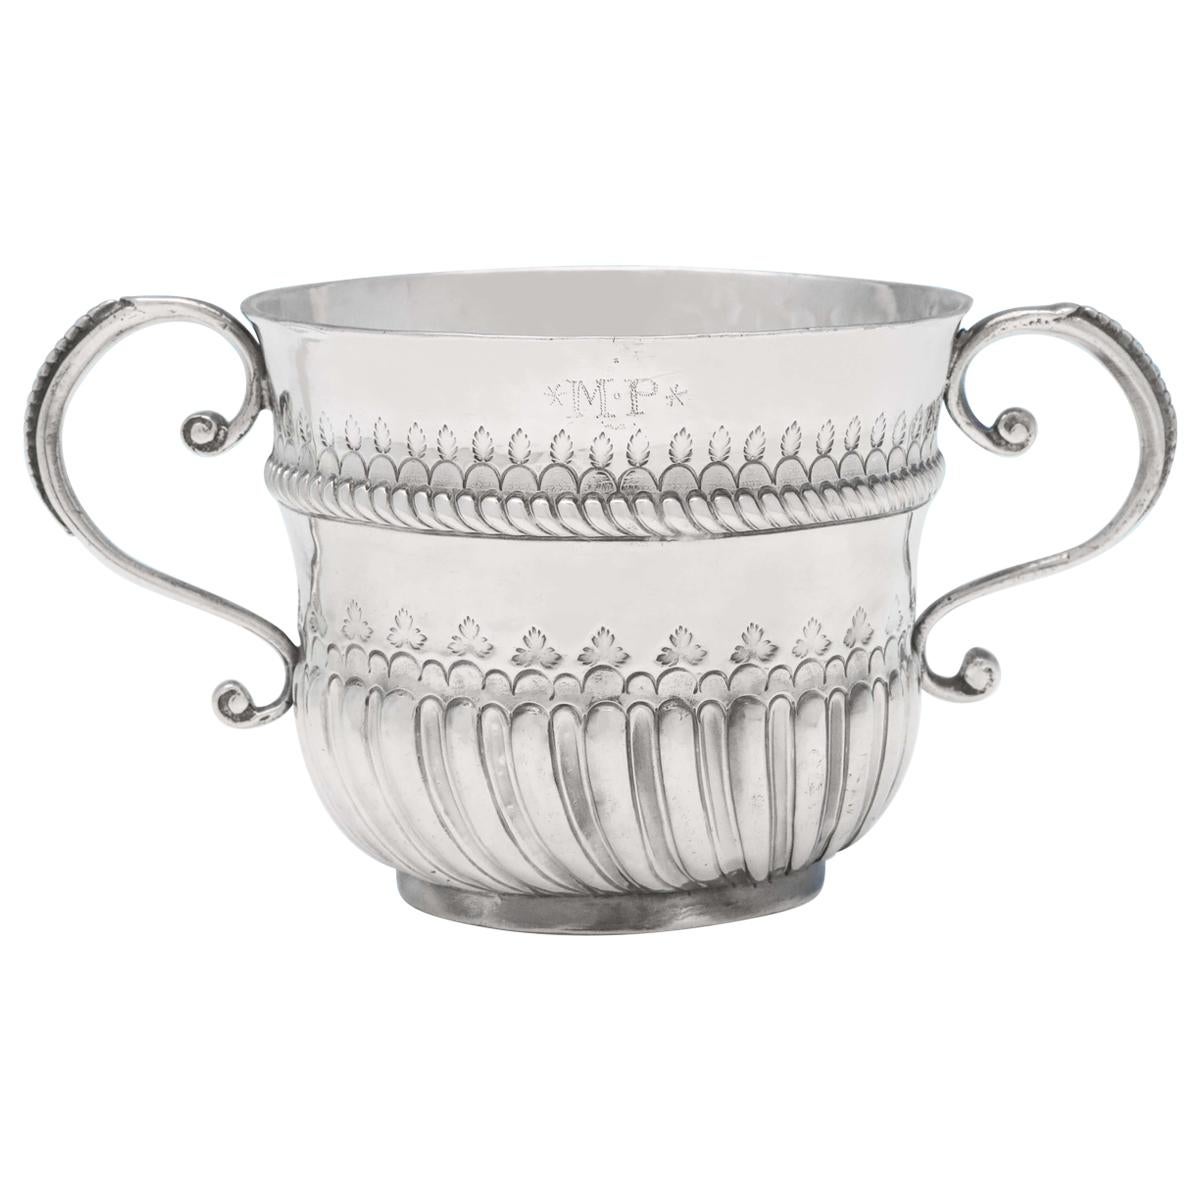 William & Mary Period Antique Brittania Standard Silver Porringer from 1698 For Sale